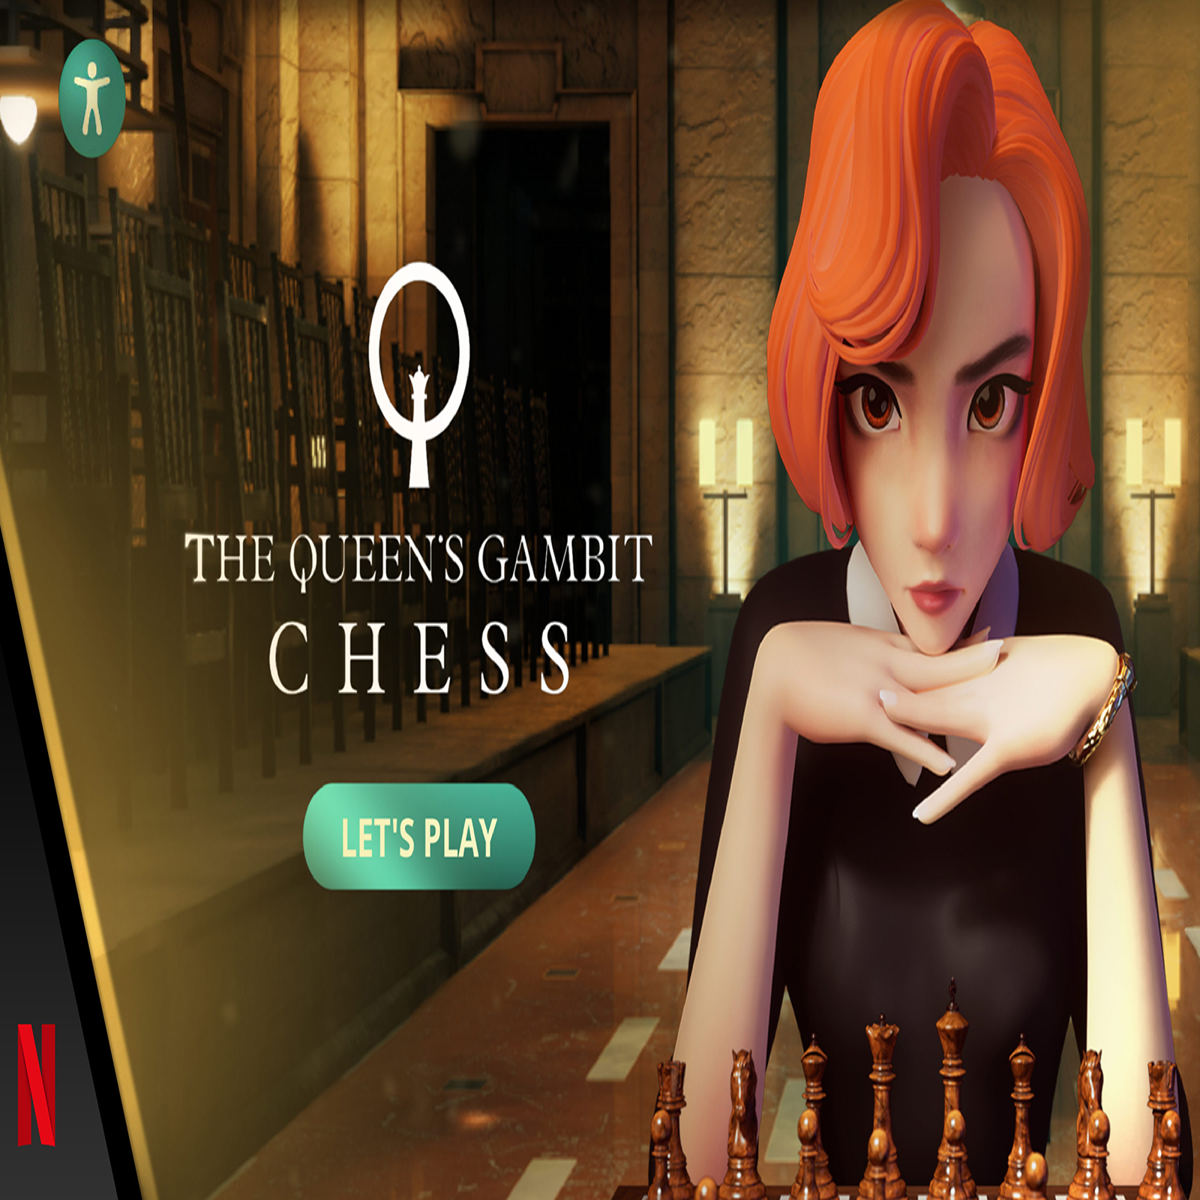 The Queen's Gambit - Netflix Miniseries - Where To Watch